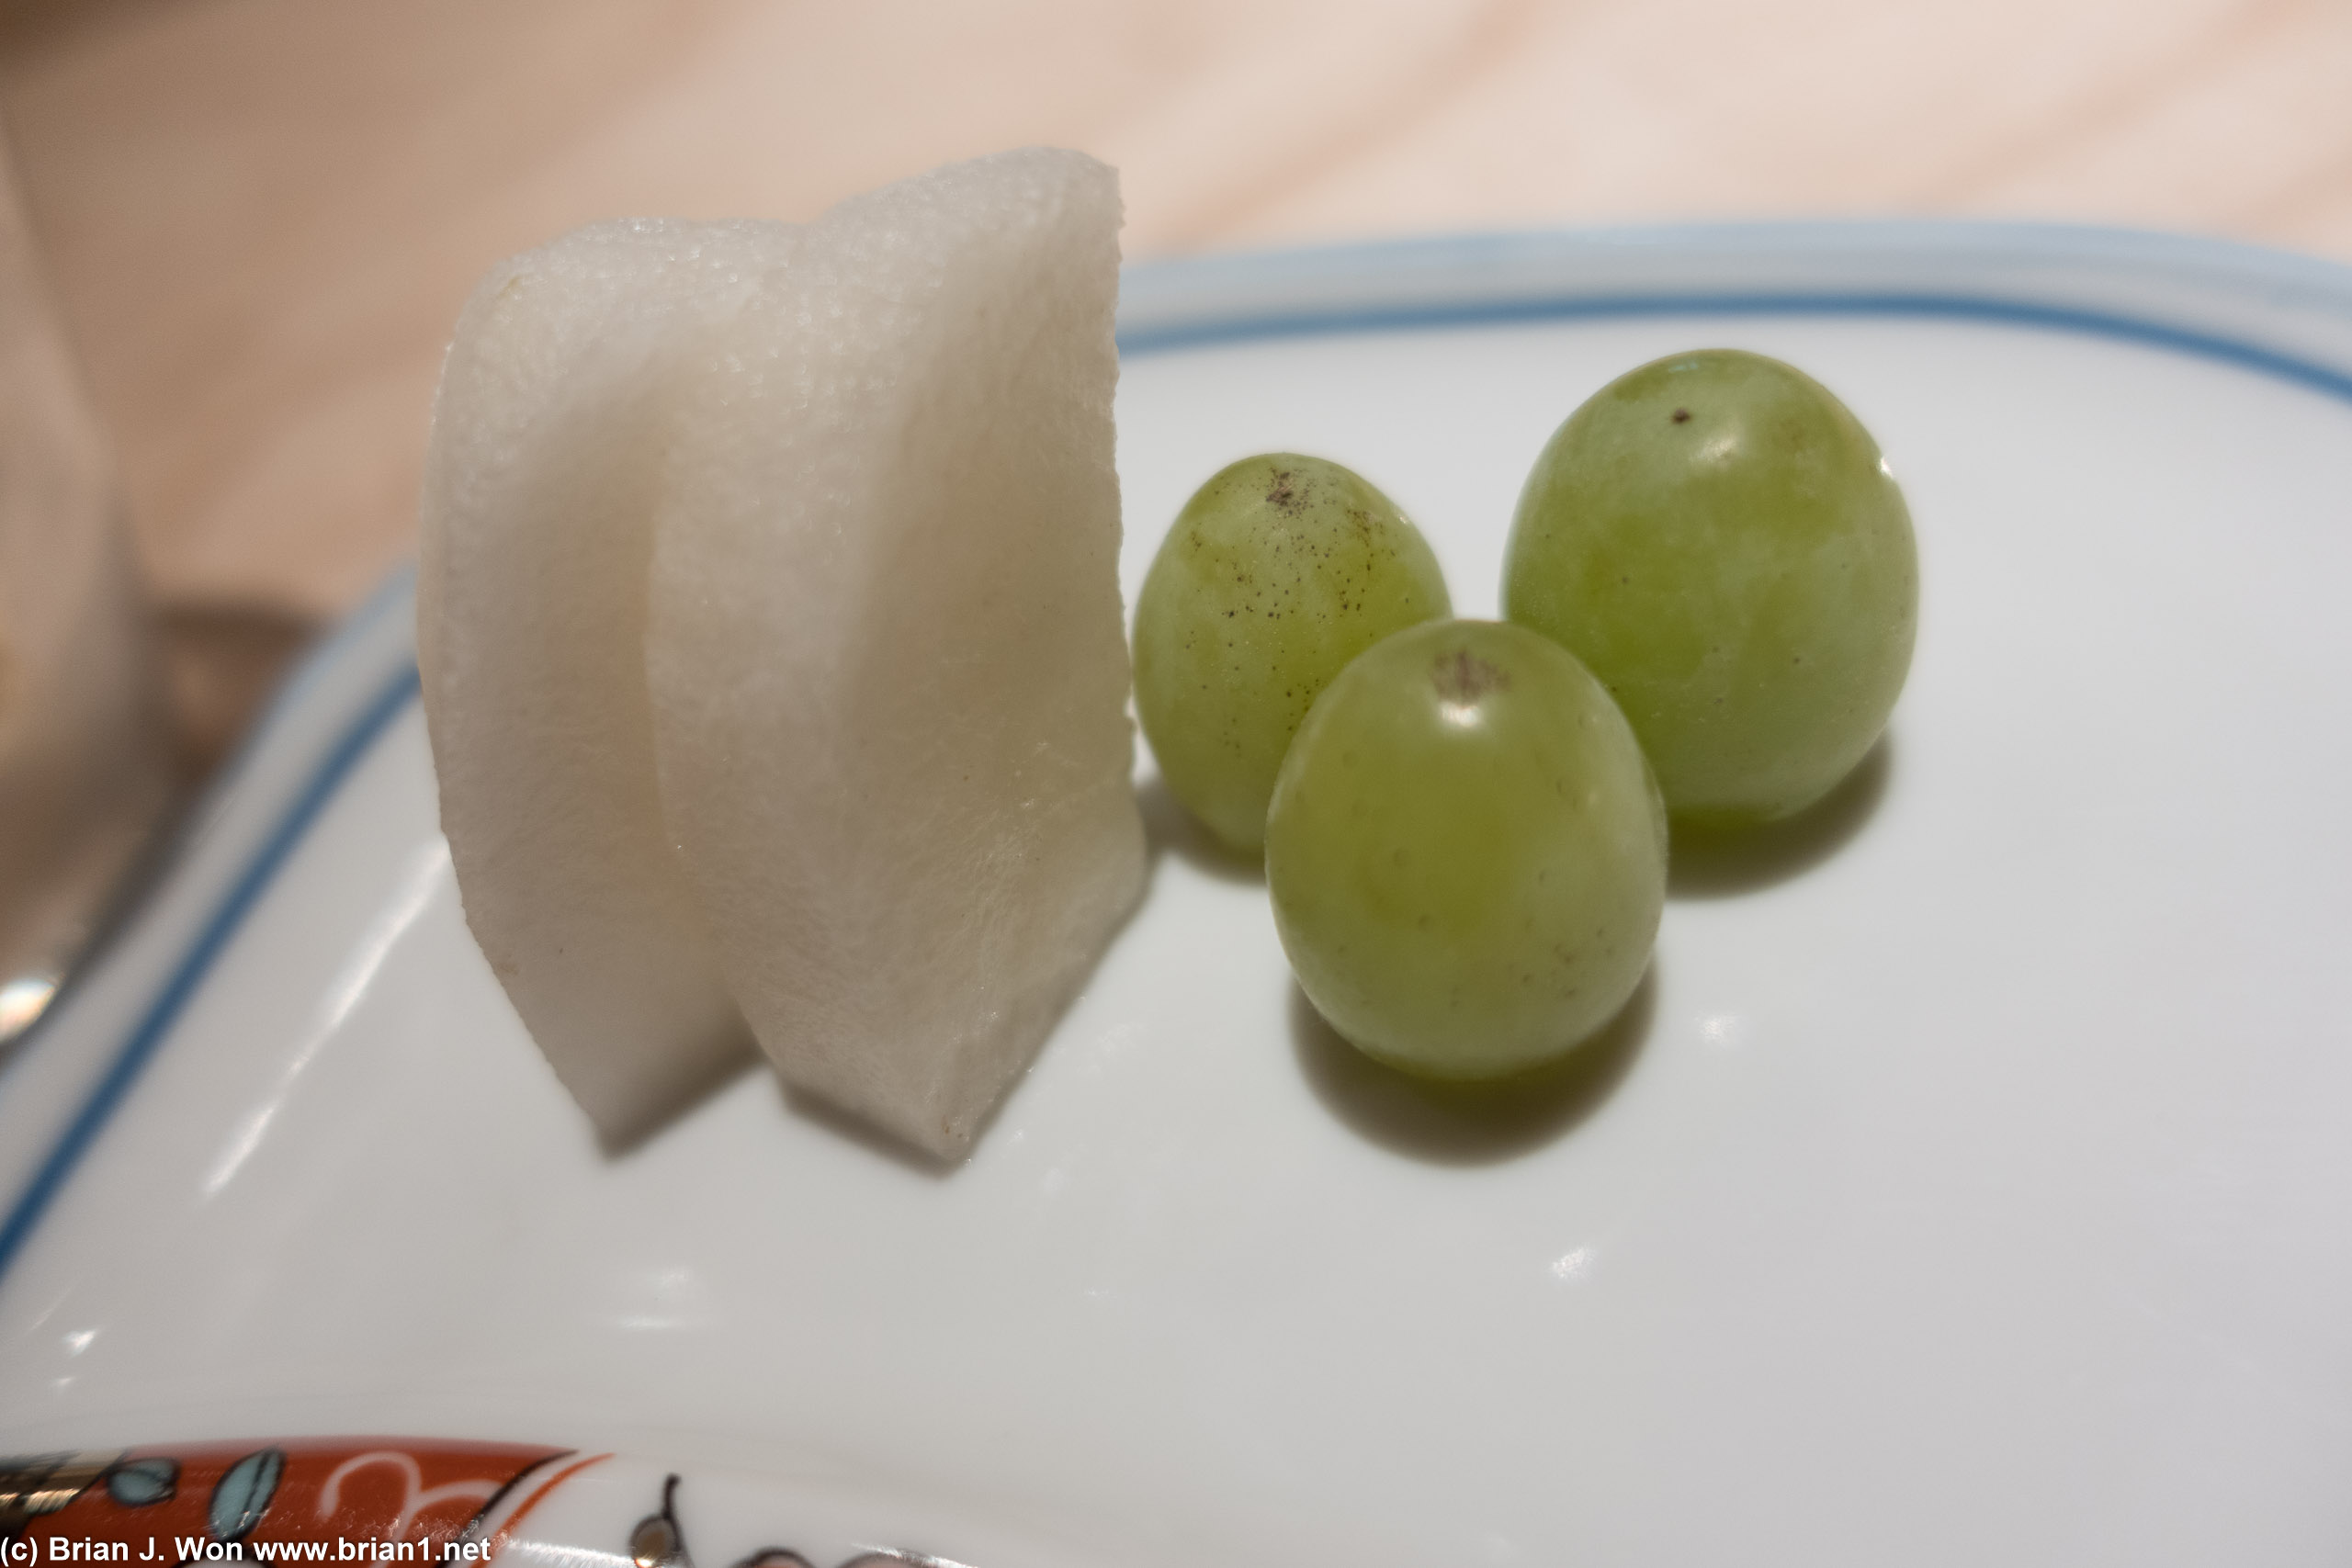 Japanese pear and grapes.